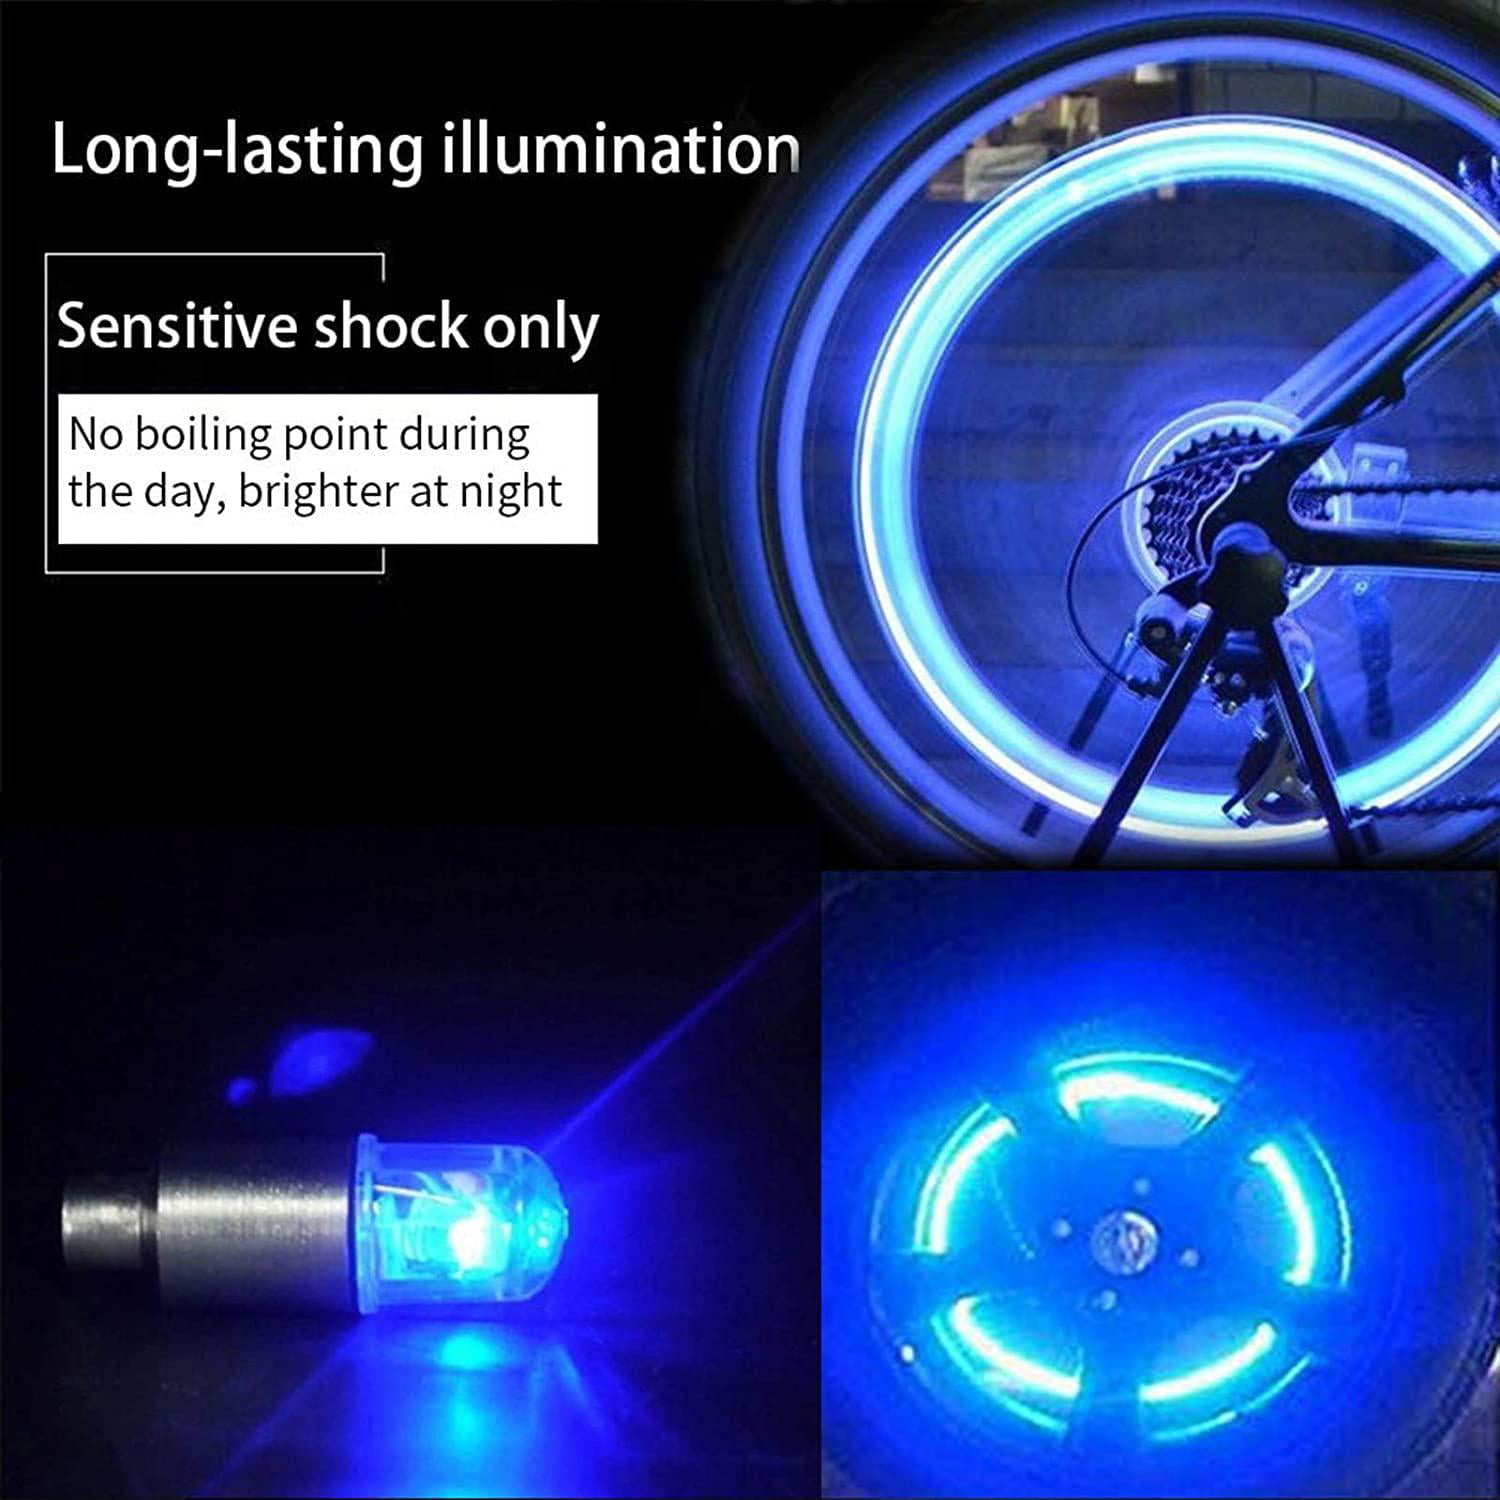 YUERR LED Bike Wheel Lights Car Tire Valve Stems Caps Bicycle Motorcycle Waterproof Tyre Spoke Flash Lights Cool Reflector Accessories for Kids Men Women with 10 Extra Batteries 